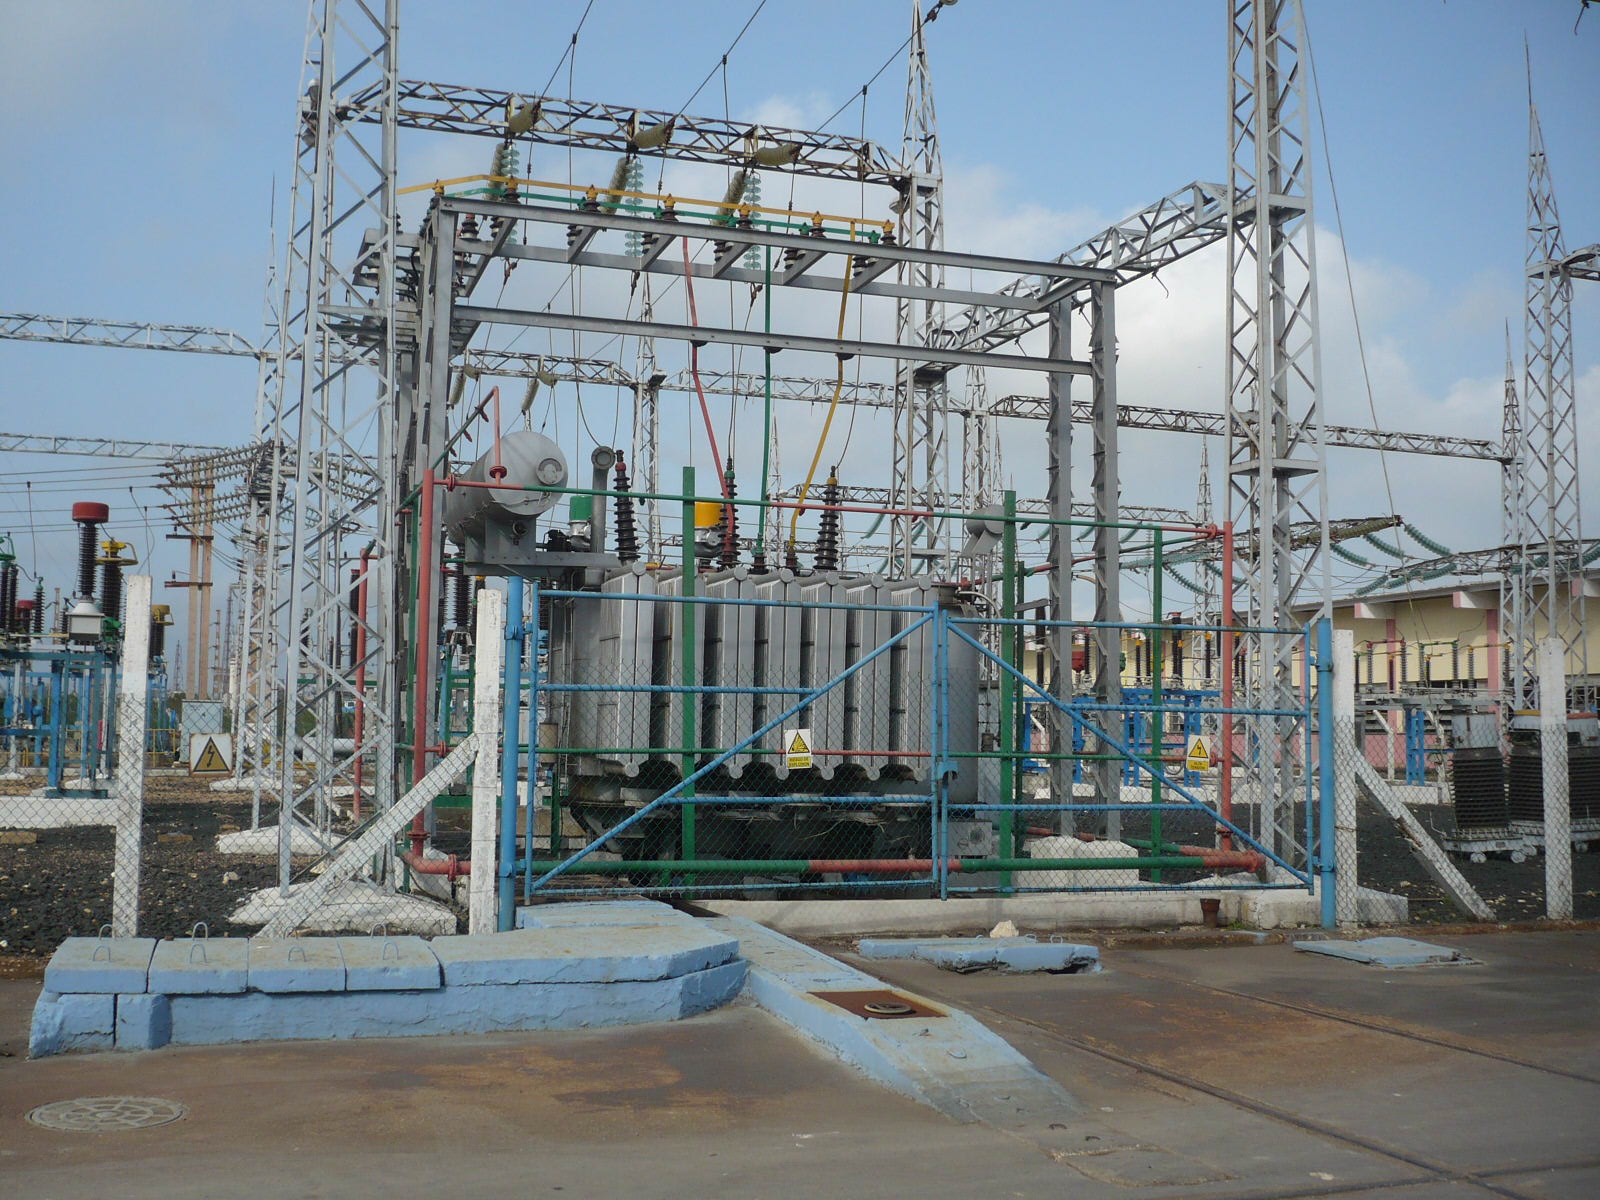 HV electrical substation in Cuba